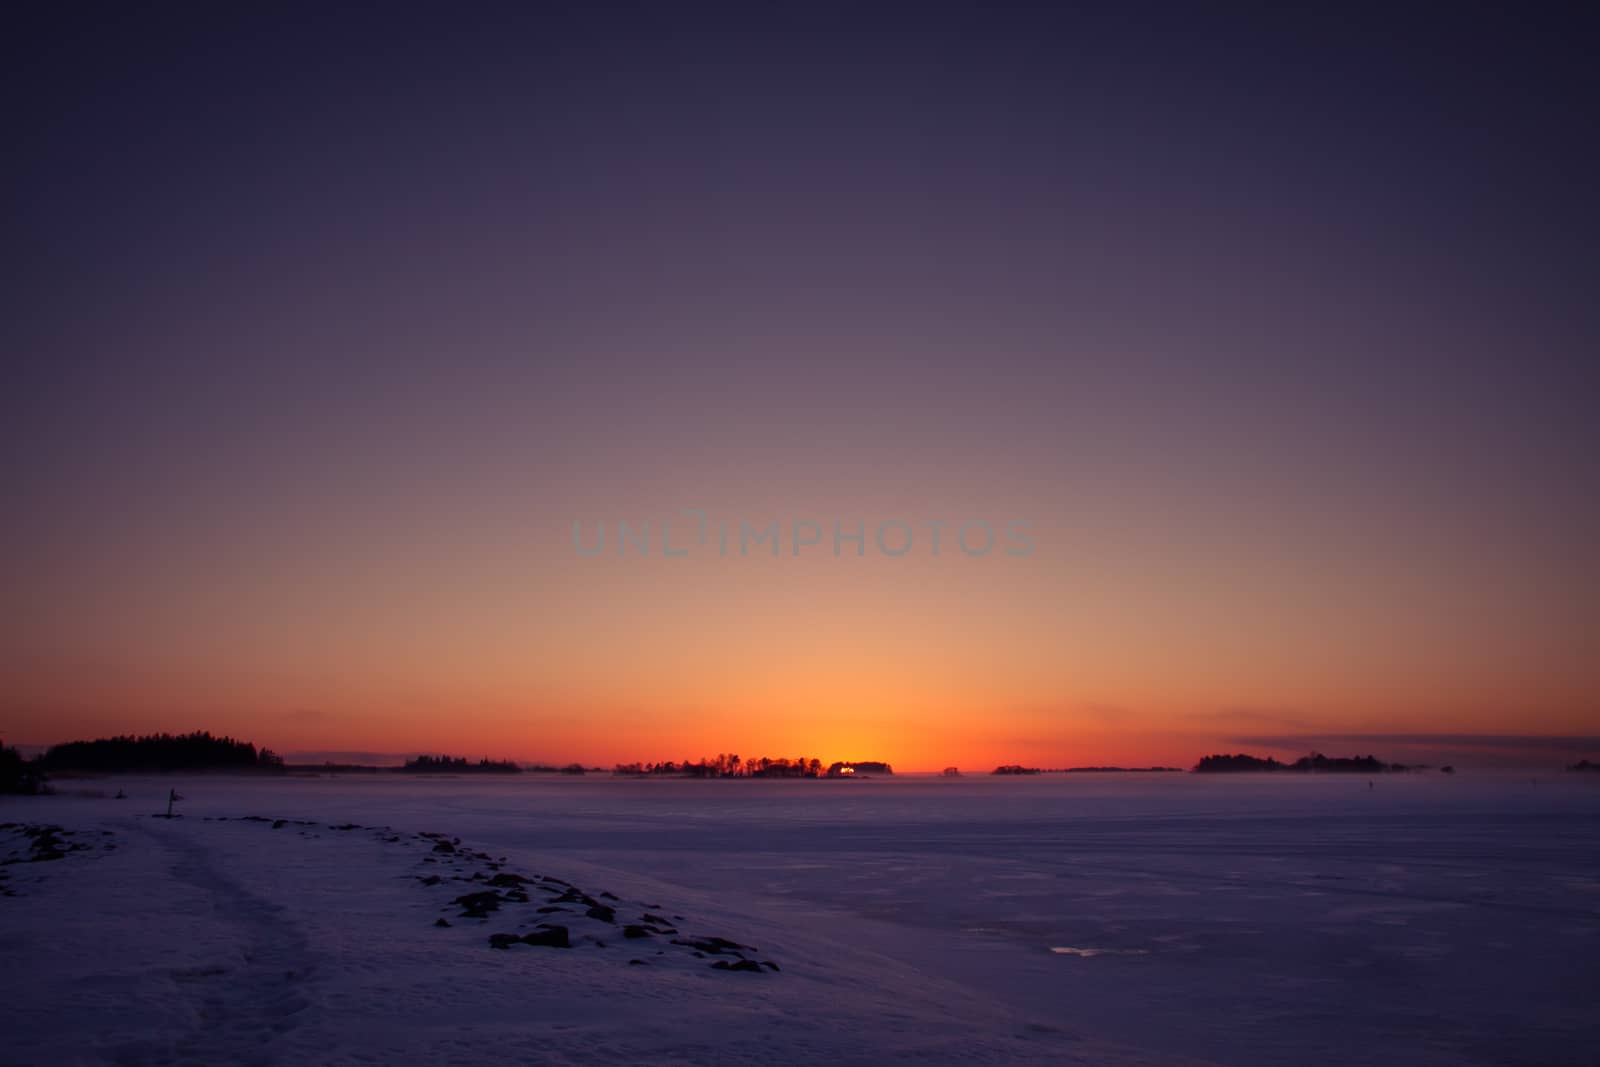 Sunset landscape in cold winter weather. Frozen sea and islands.